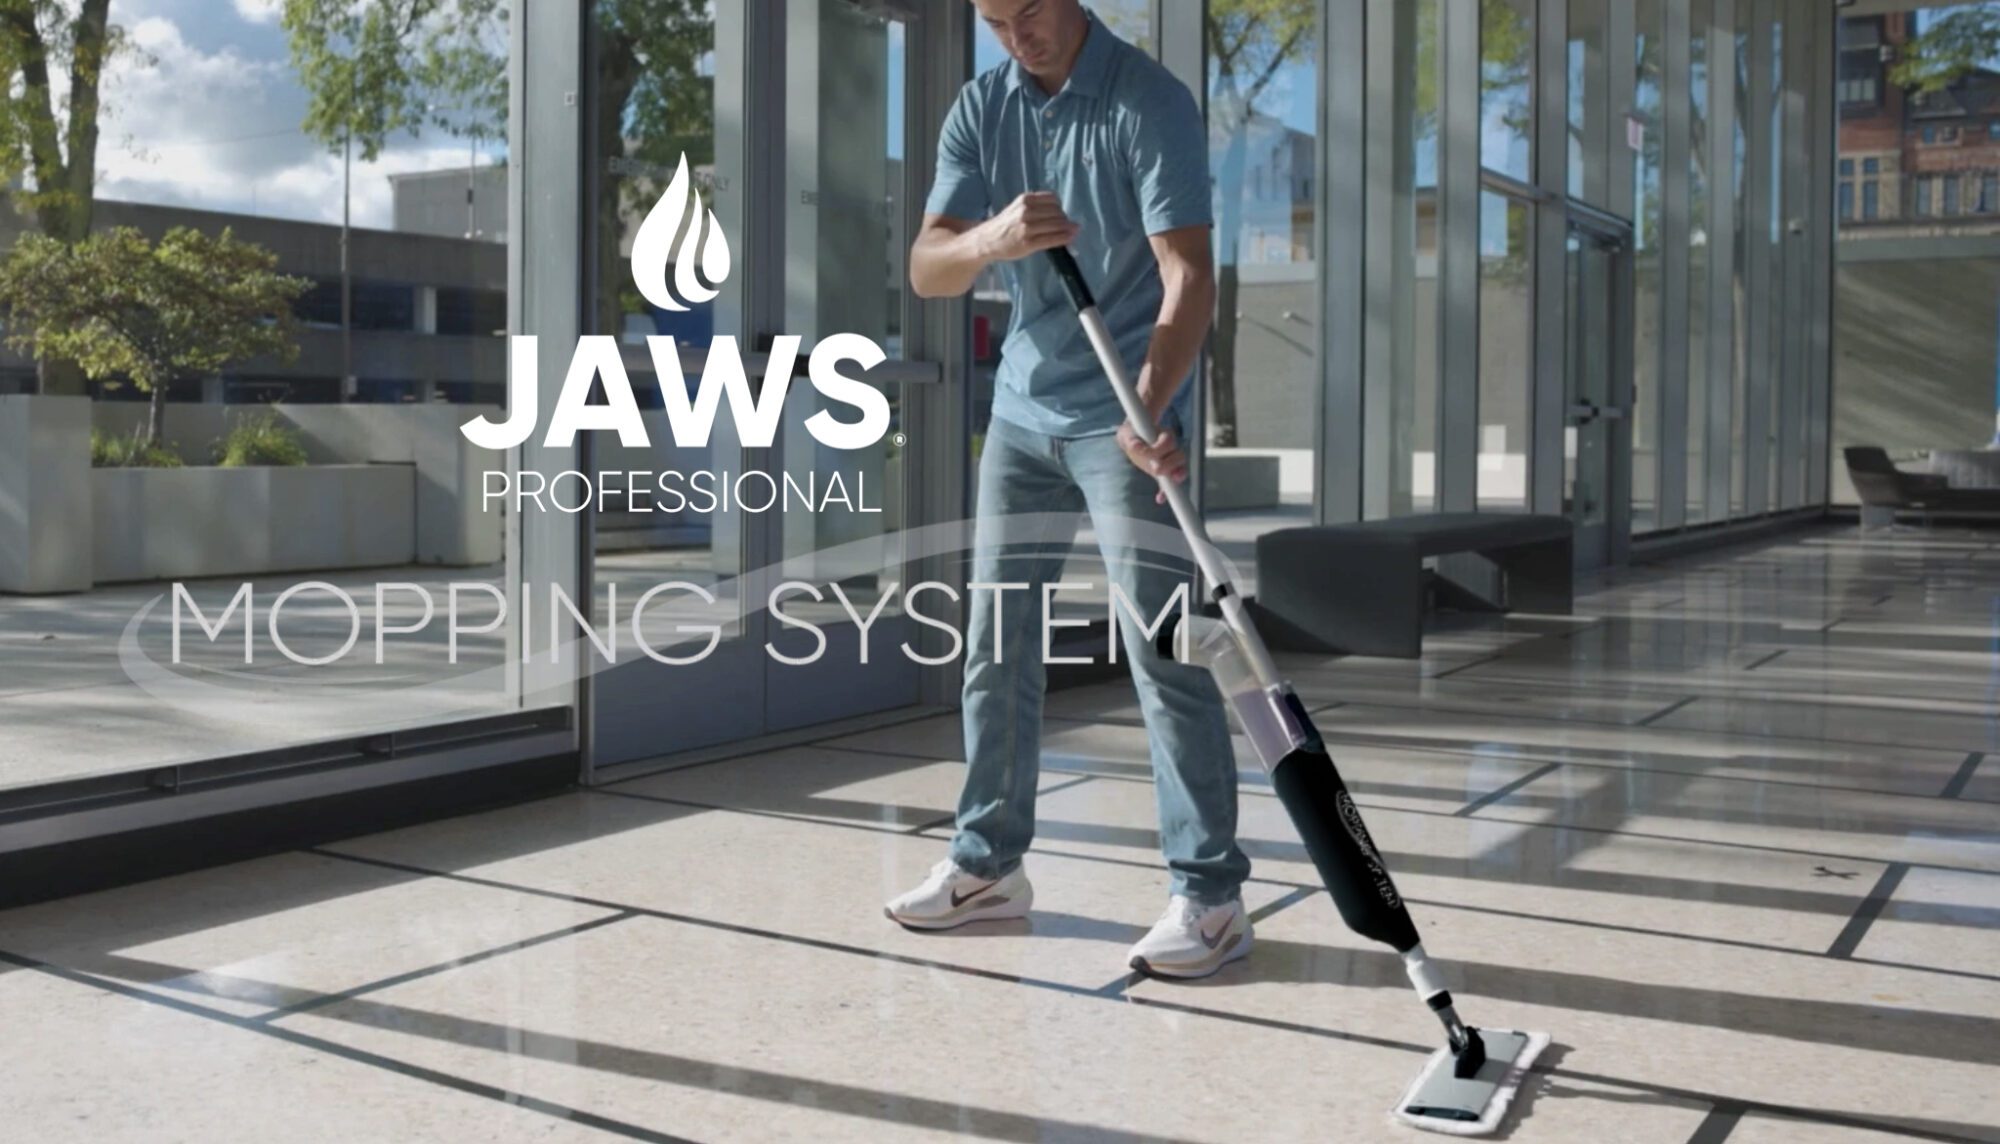 JAWS Professional Mopping System - 3 Replacement Mop Heads - JAWS-3003-CS -  Copy - Texas Technologies, Packaging Solutions